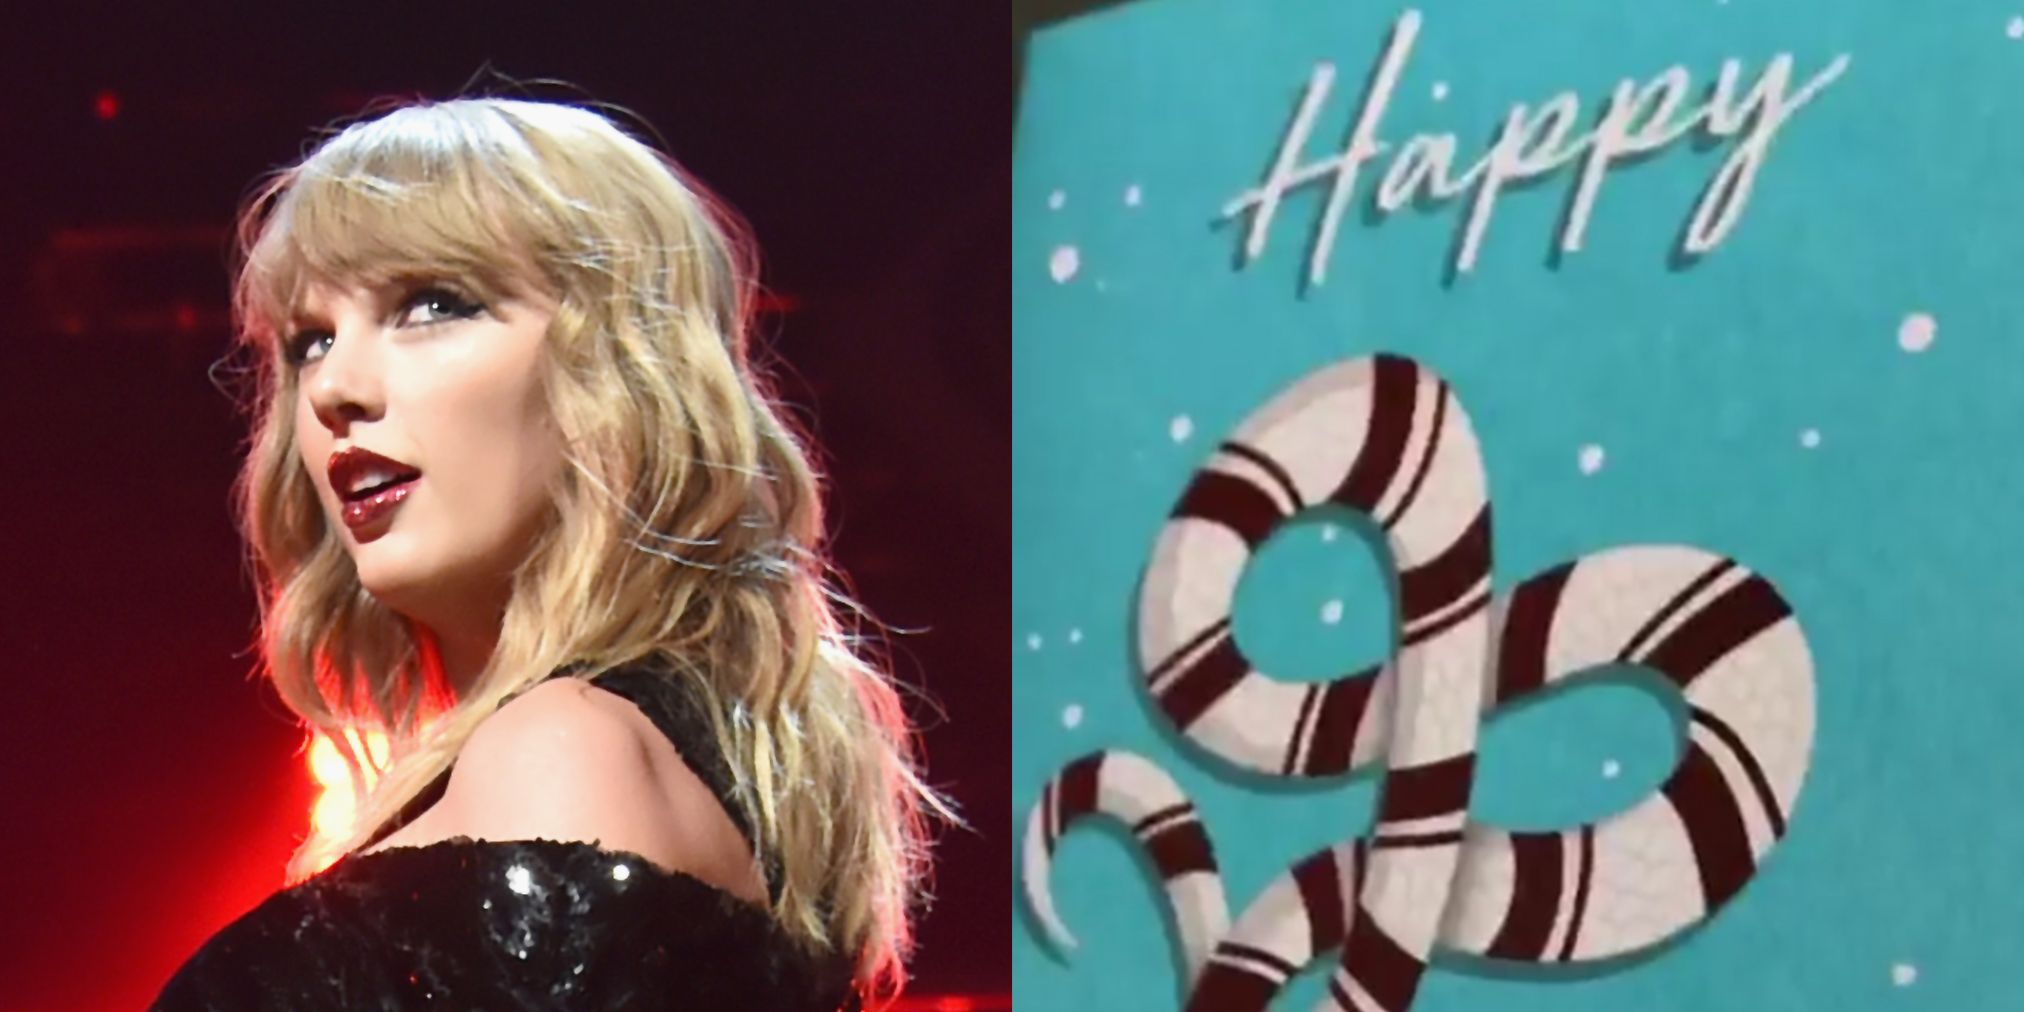 Taylor Swift Sent The Most Extra Christmas Cards This Year